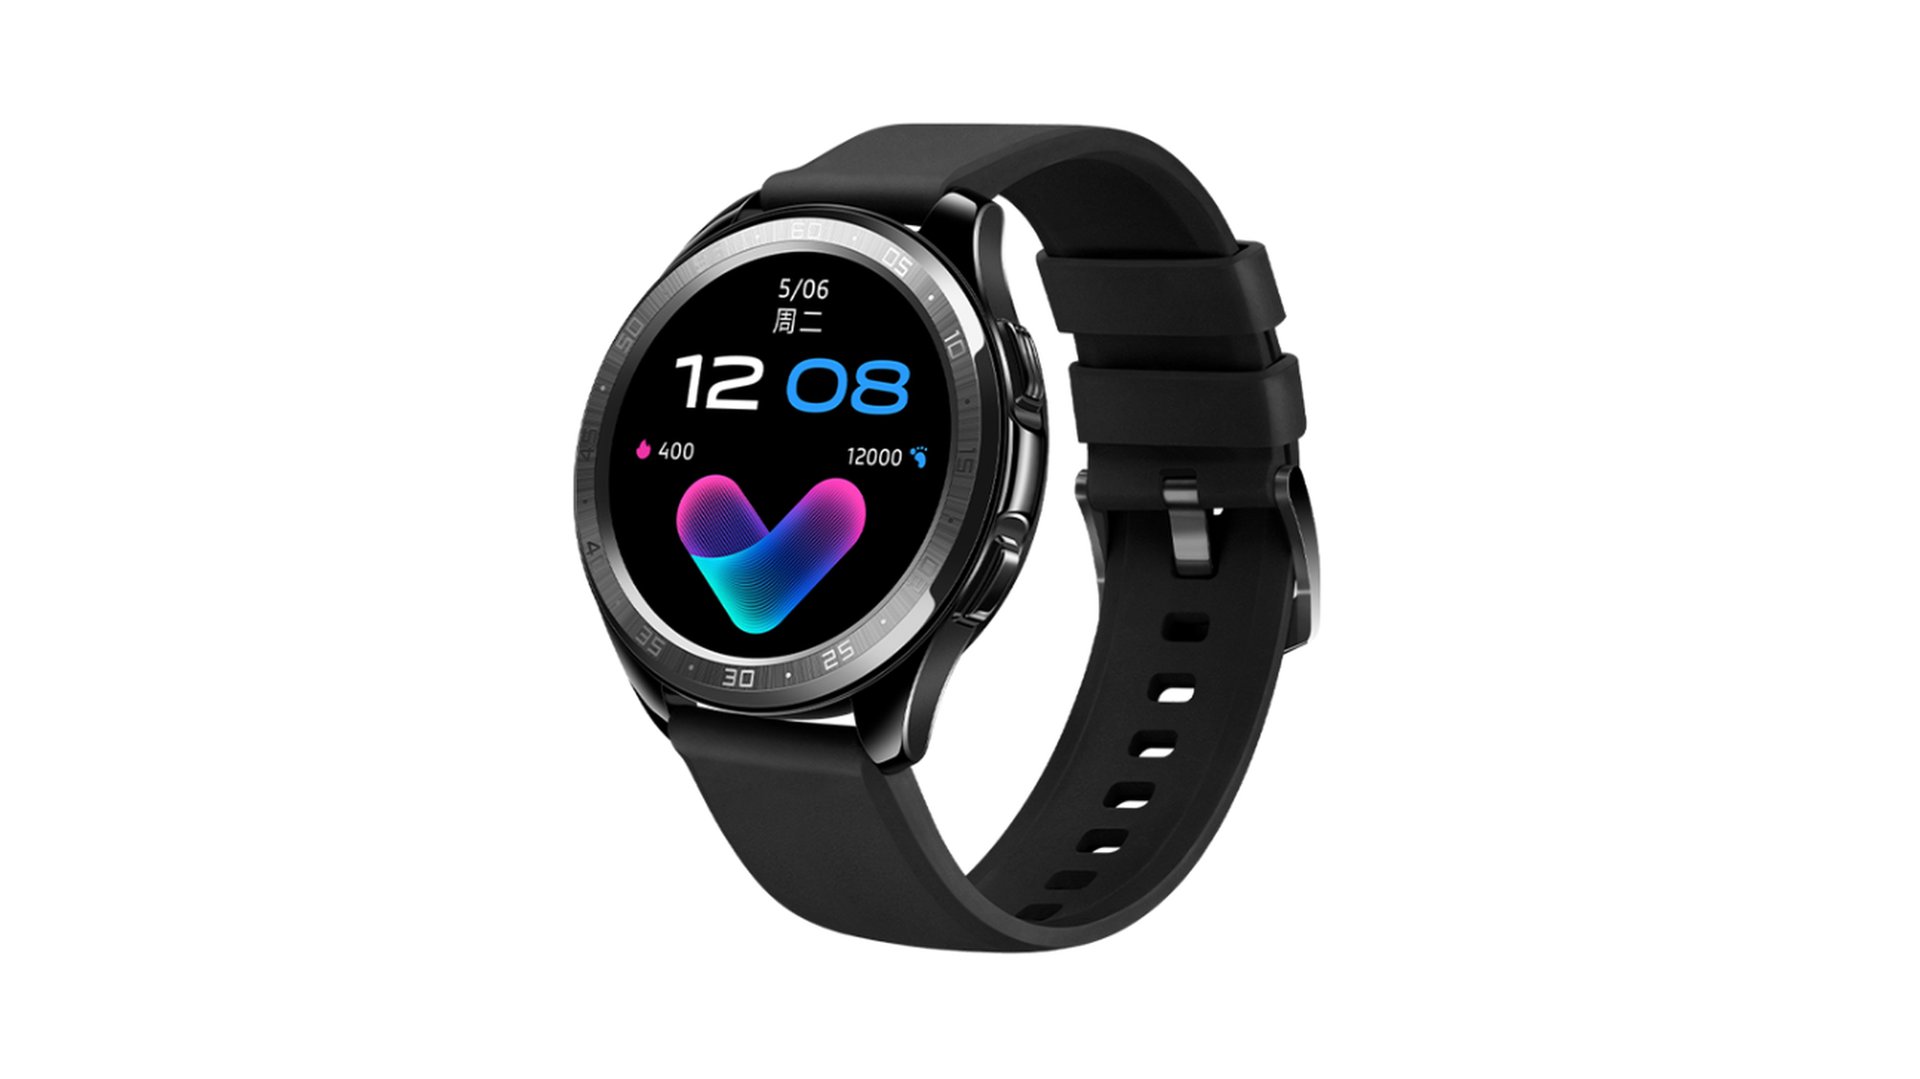 Vivo Watch goes official: A classy 